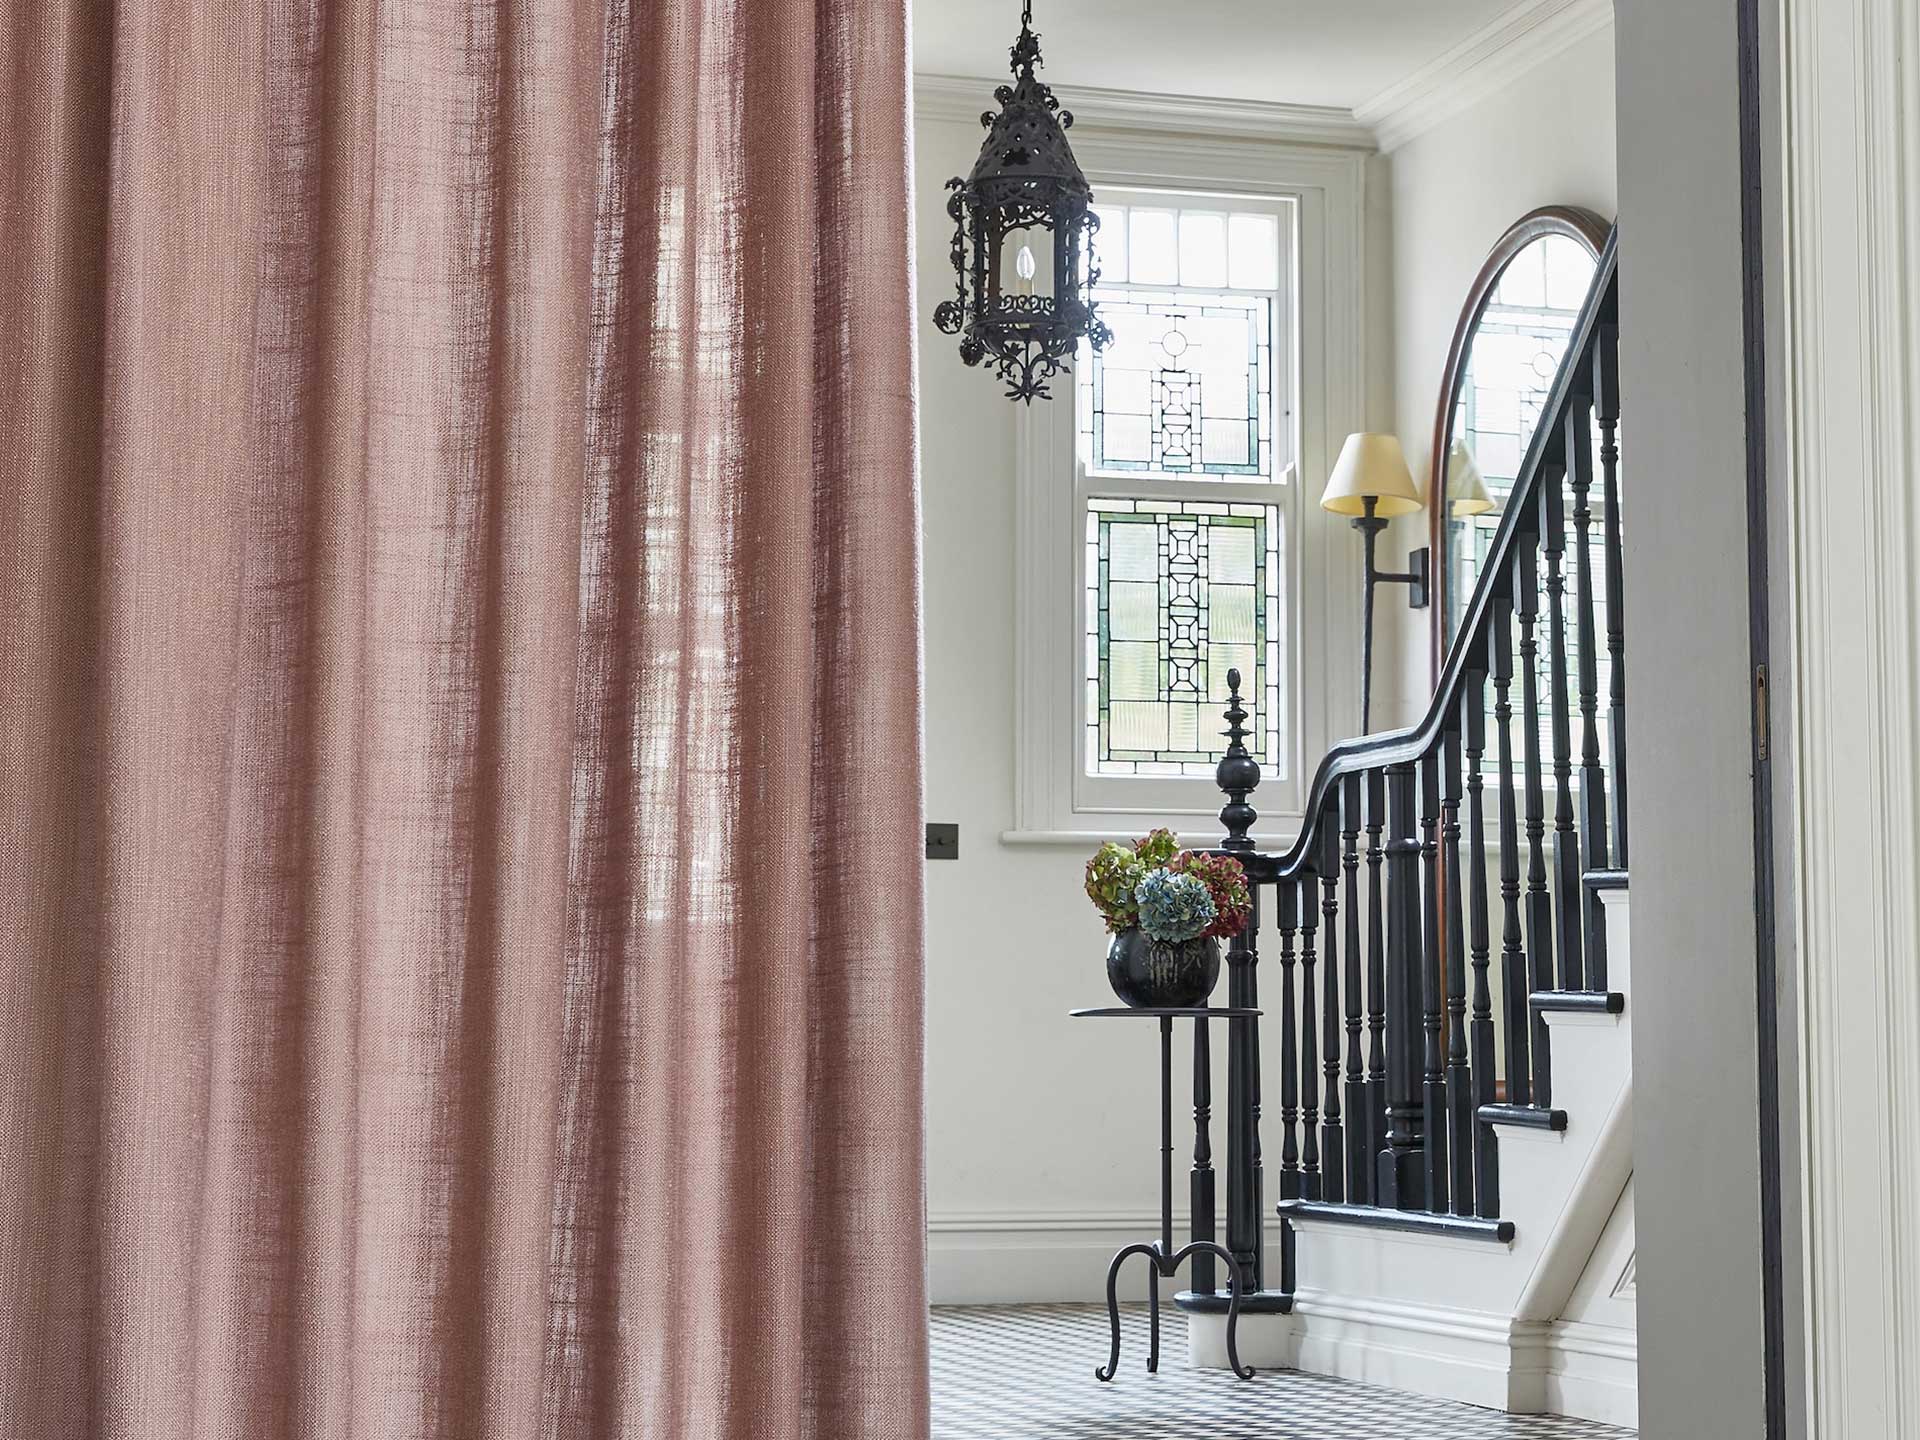 Soften your broken plan living with drapes to divide